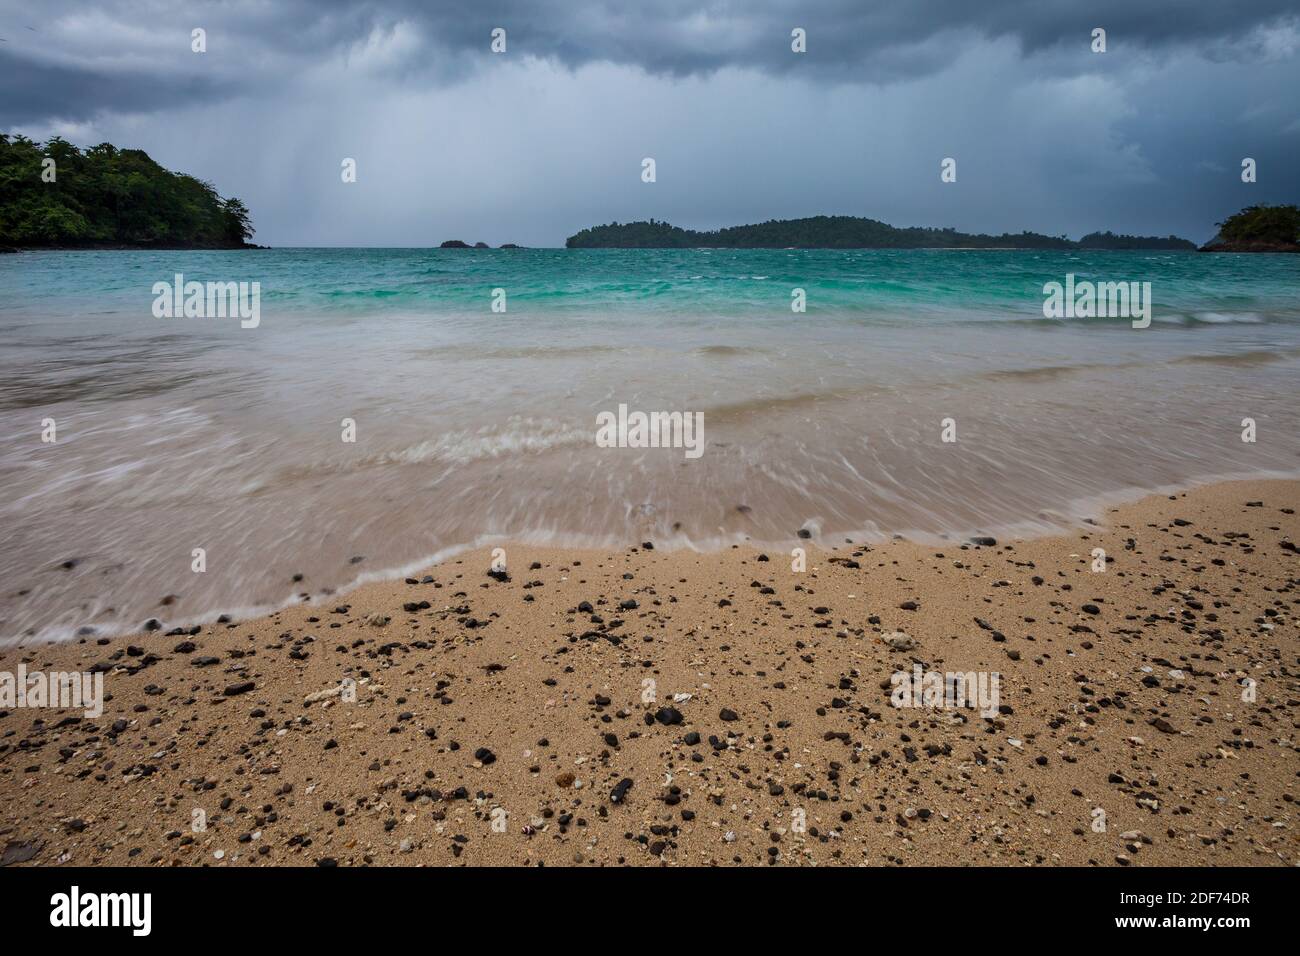 Panama landscape with approaching storm at the northern tip of Coiba island in Coiba island national park, Pacific coast, Republic of Panama. Stock Photo